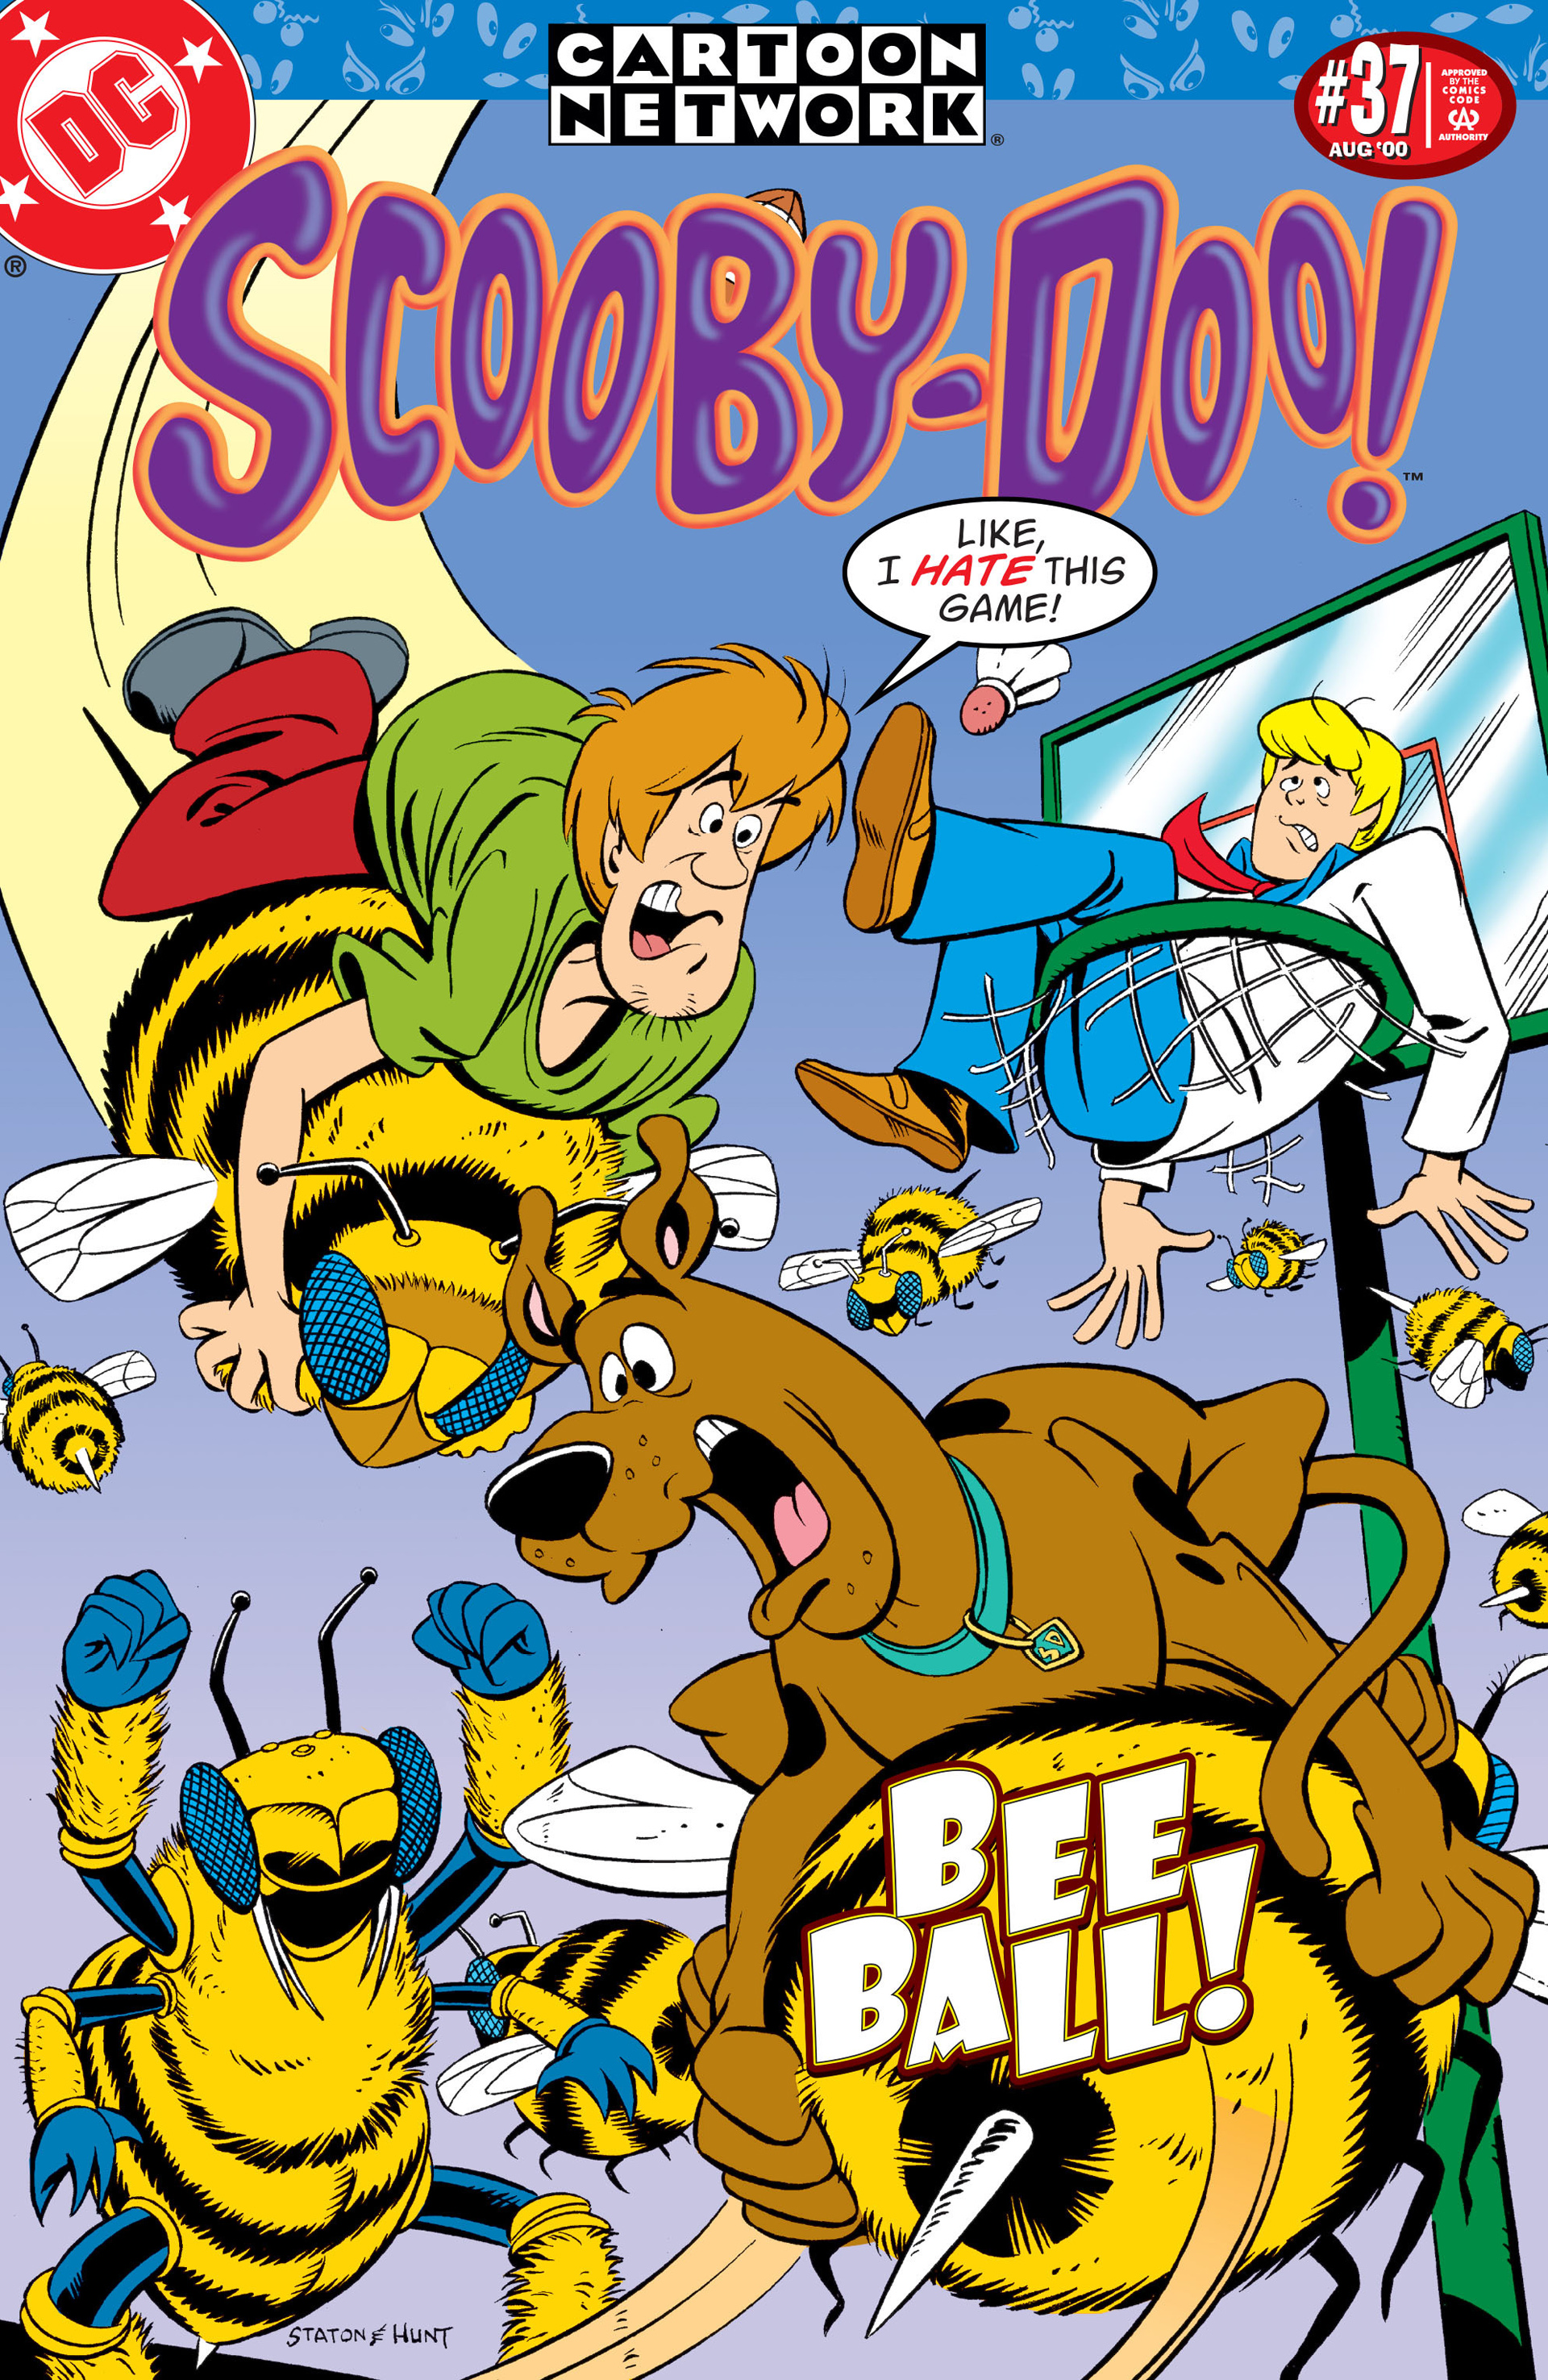 Read Online Scooby Doo 1997 Comic Issue 37 